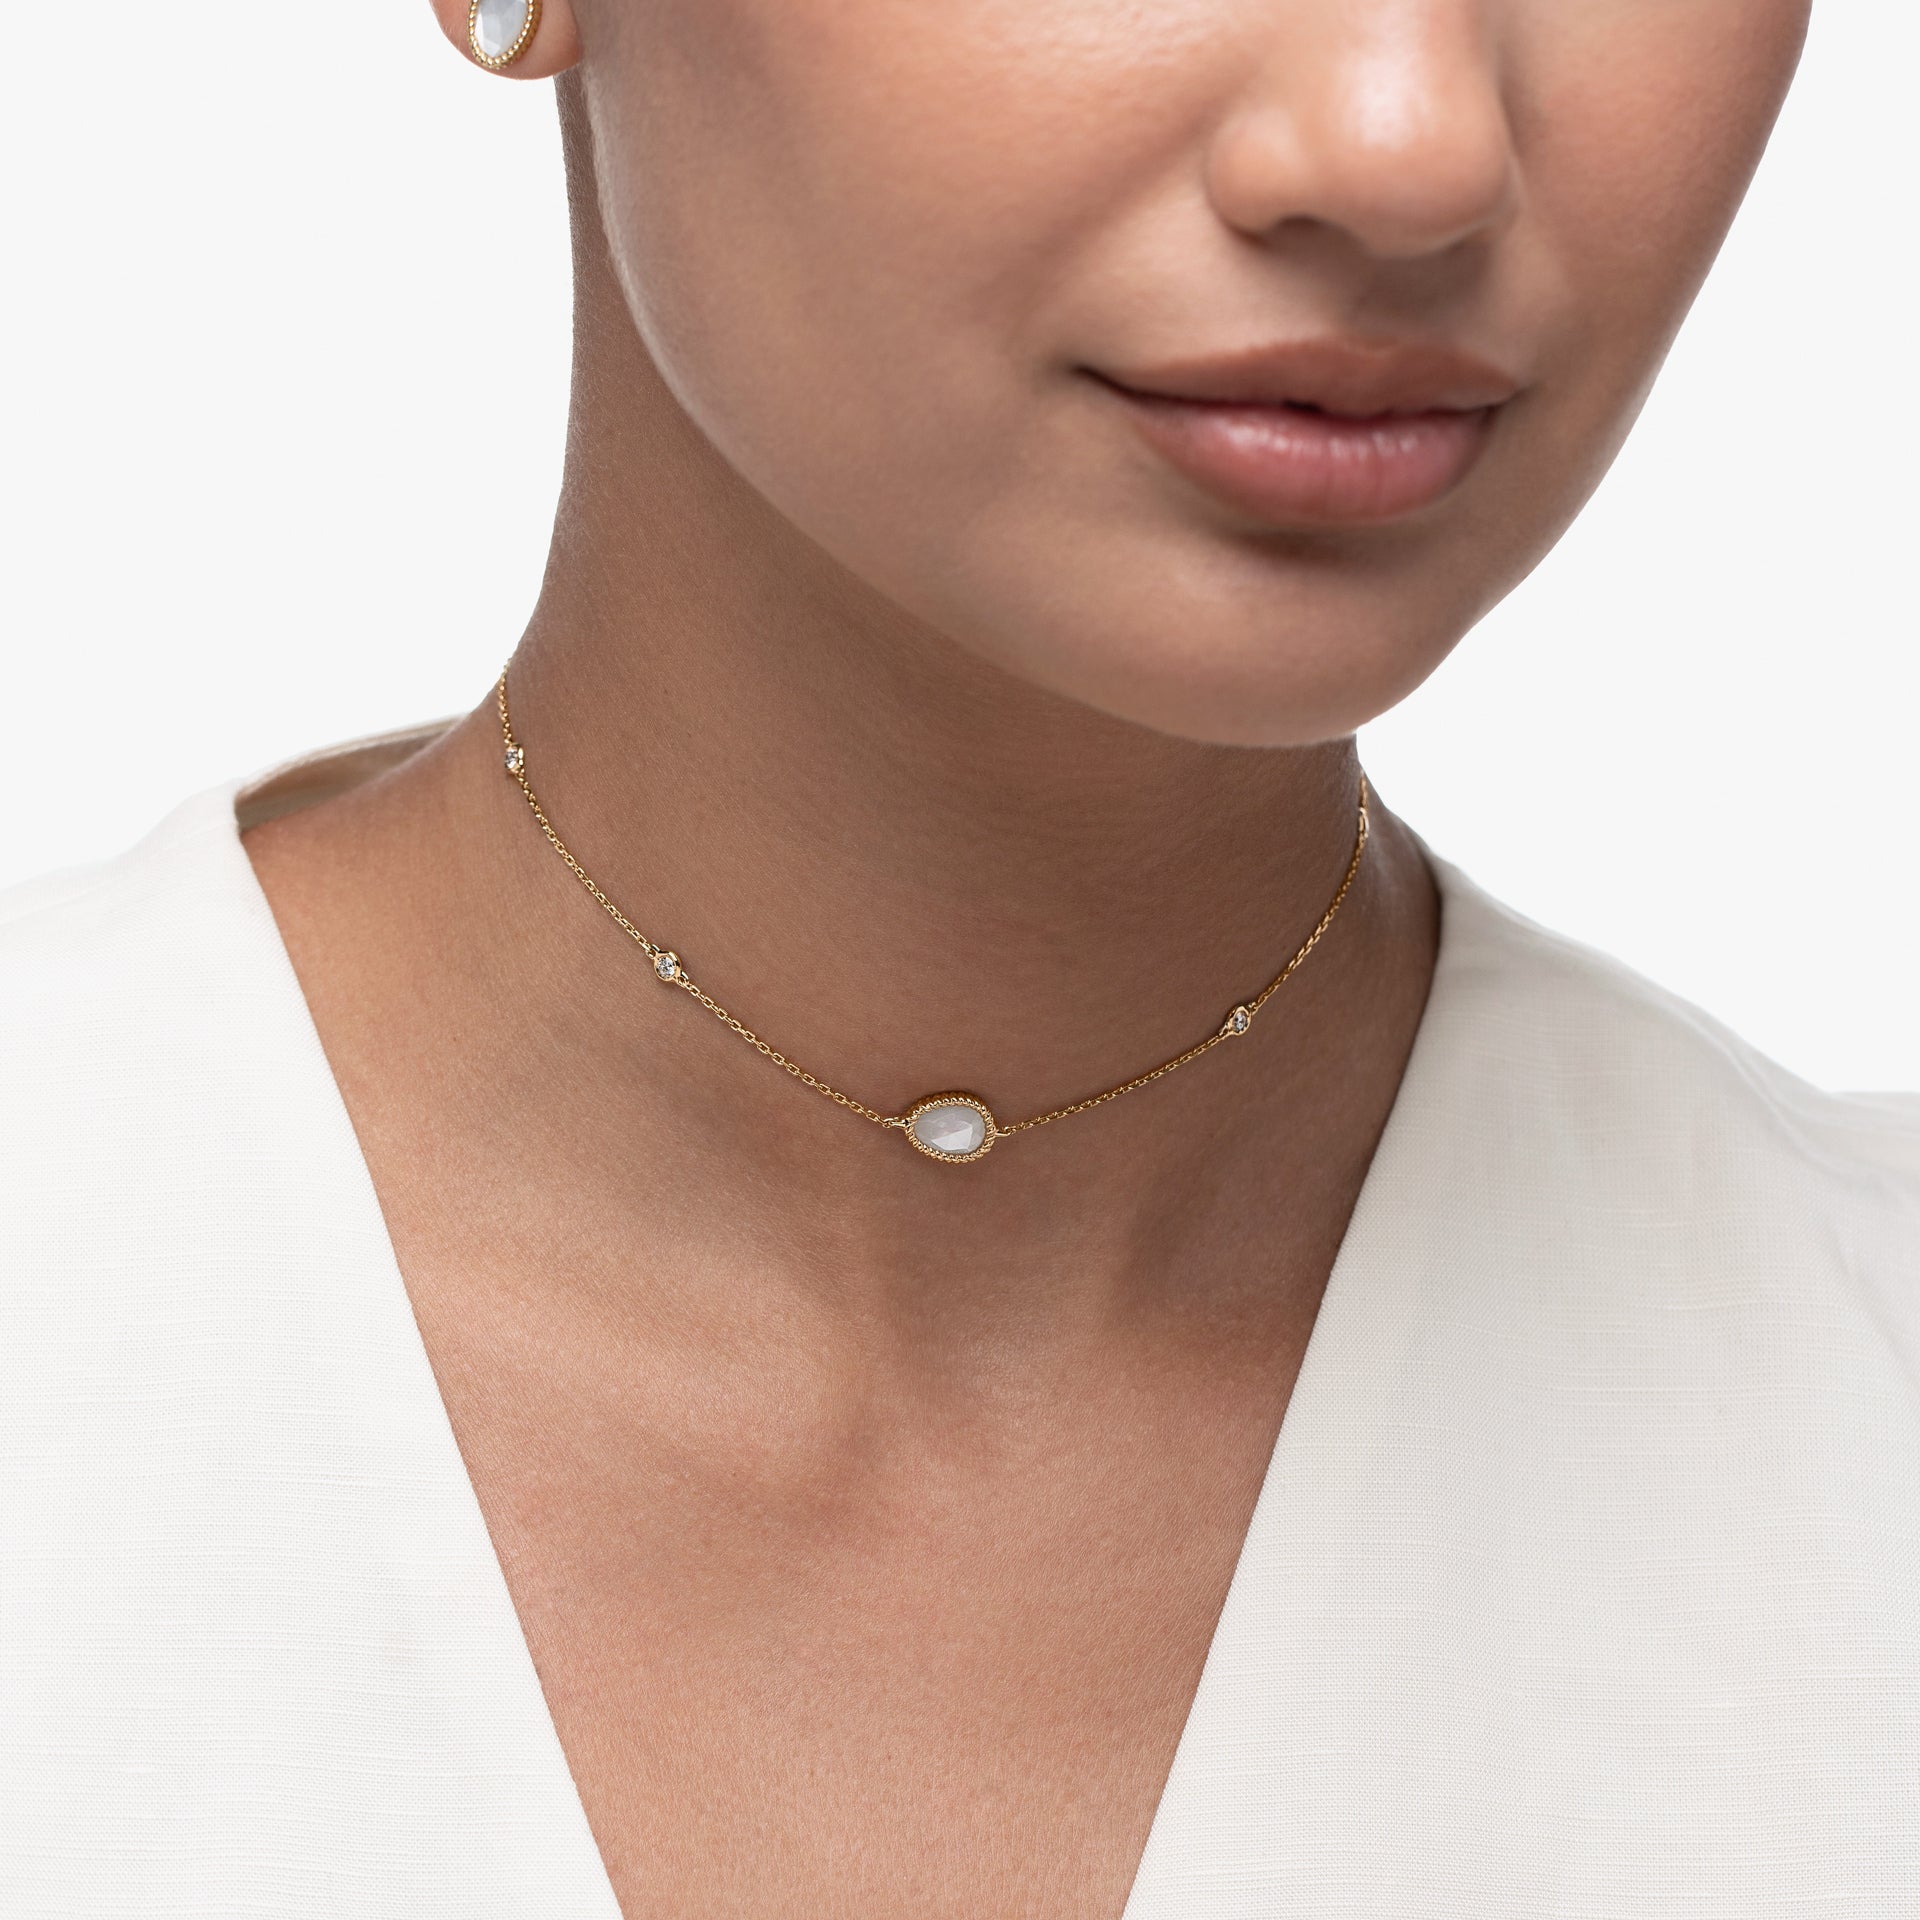 Nina Mariner Choker In 18 Karat Yellow Gold With Natural White Diamonds And Mother Of Pearl Stone